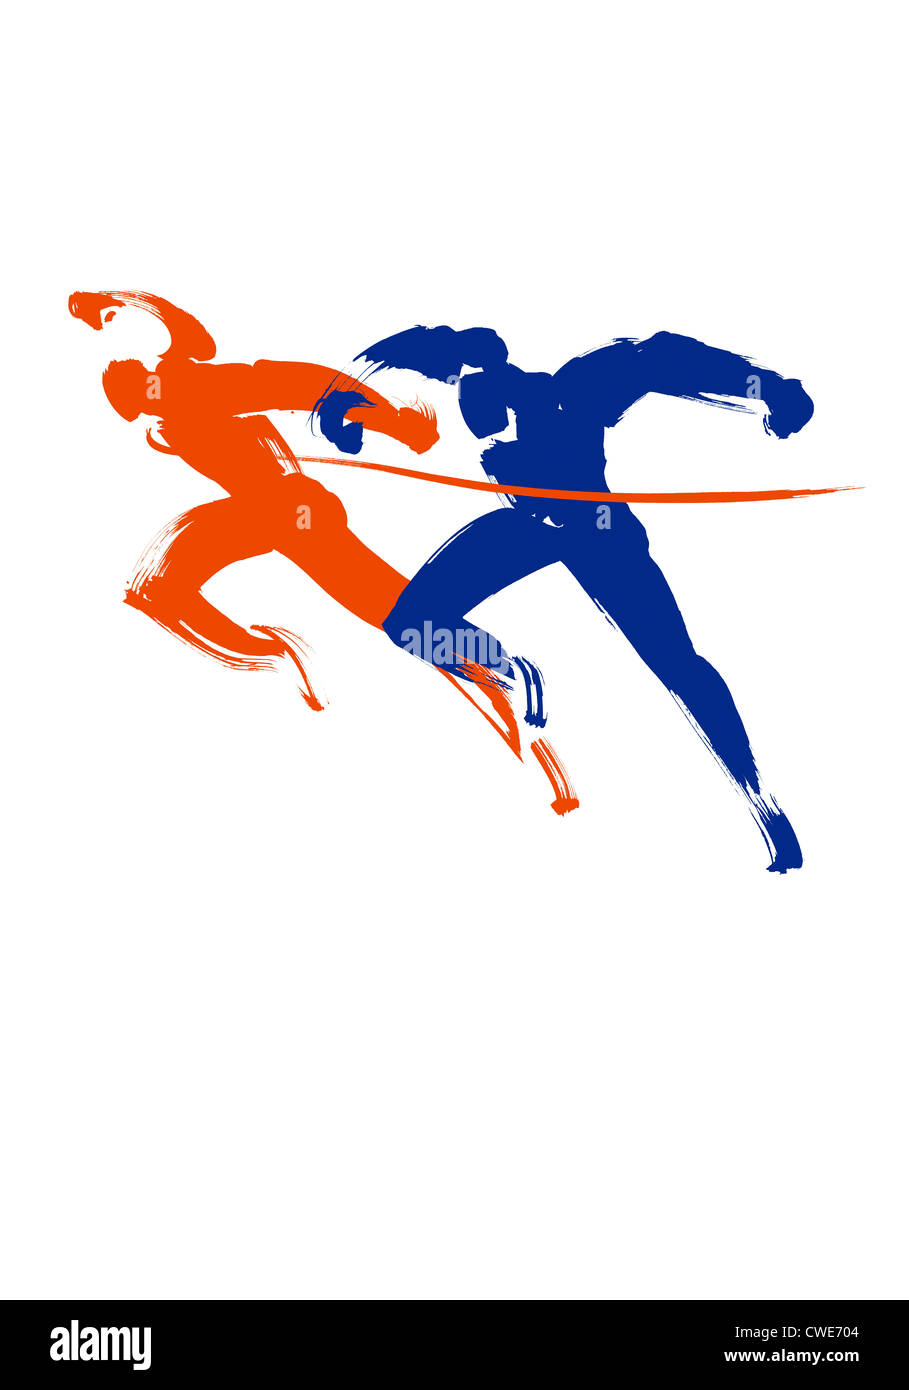 Illustration Of Two Sportspersons At Finishing Line Stock Photo